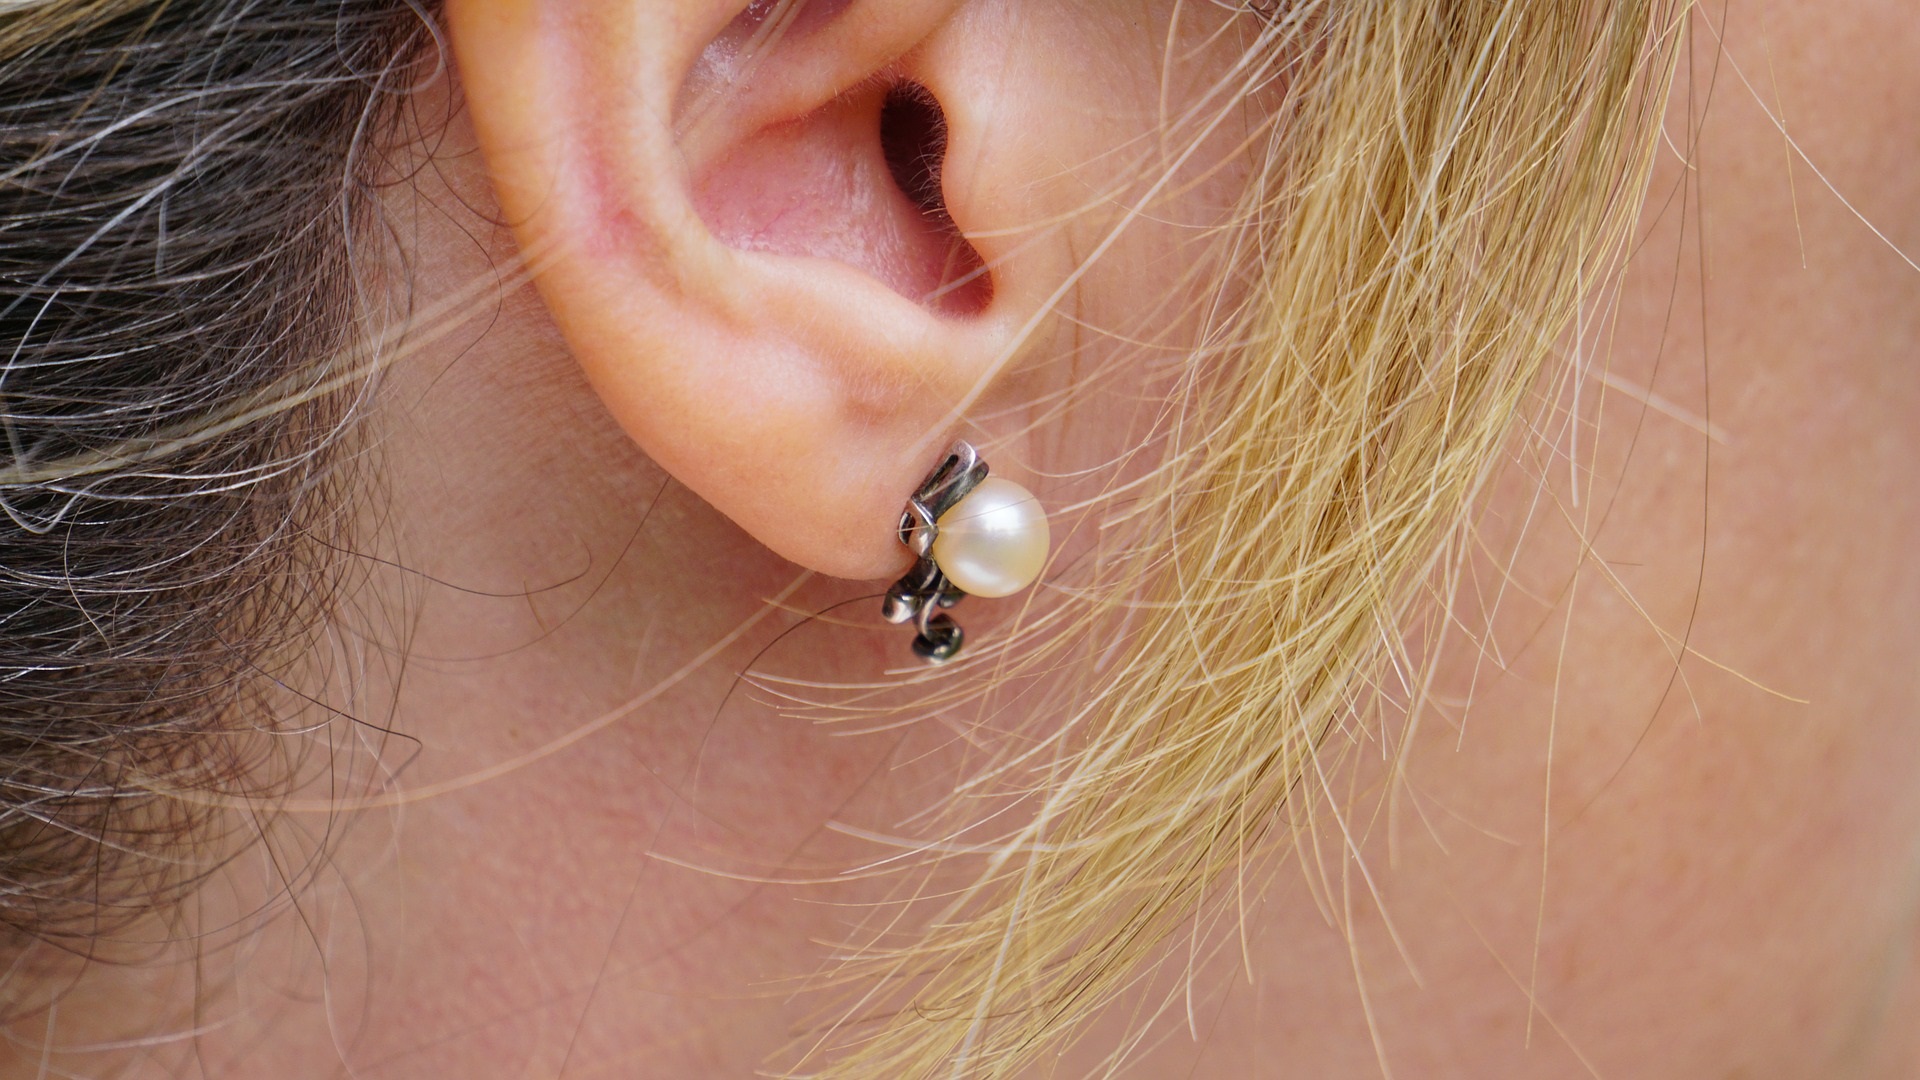 Pin on Nose ear Piercing